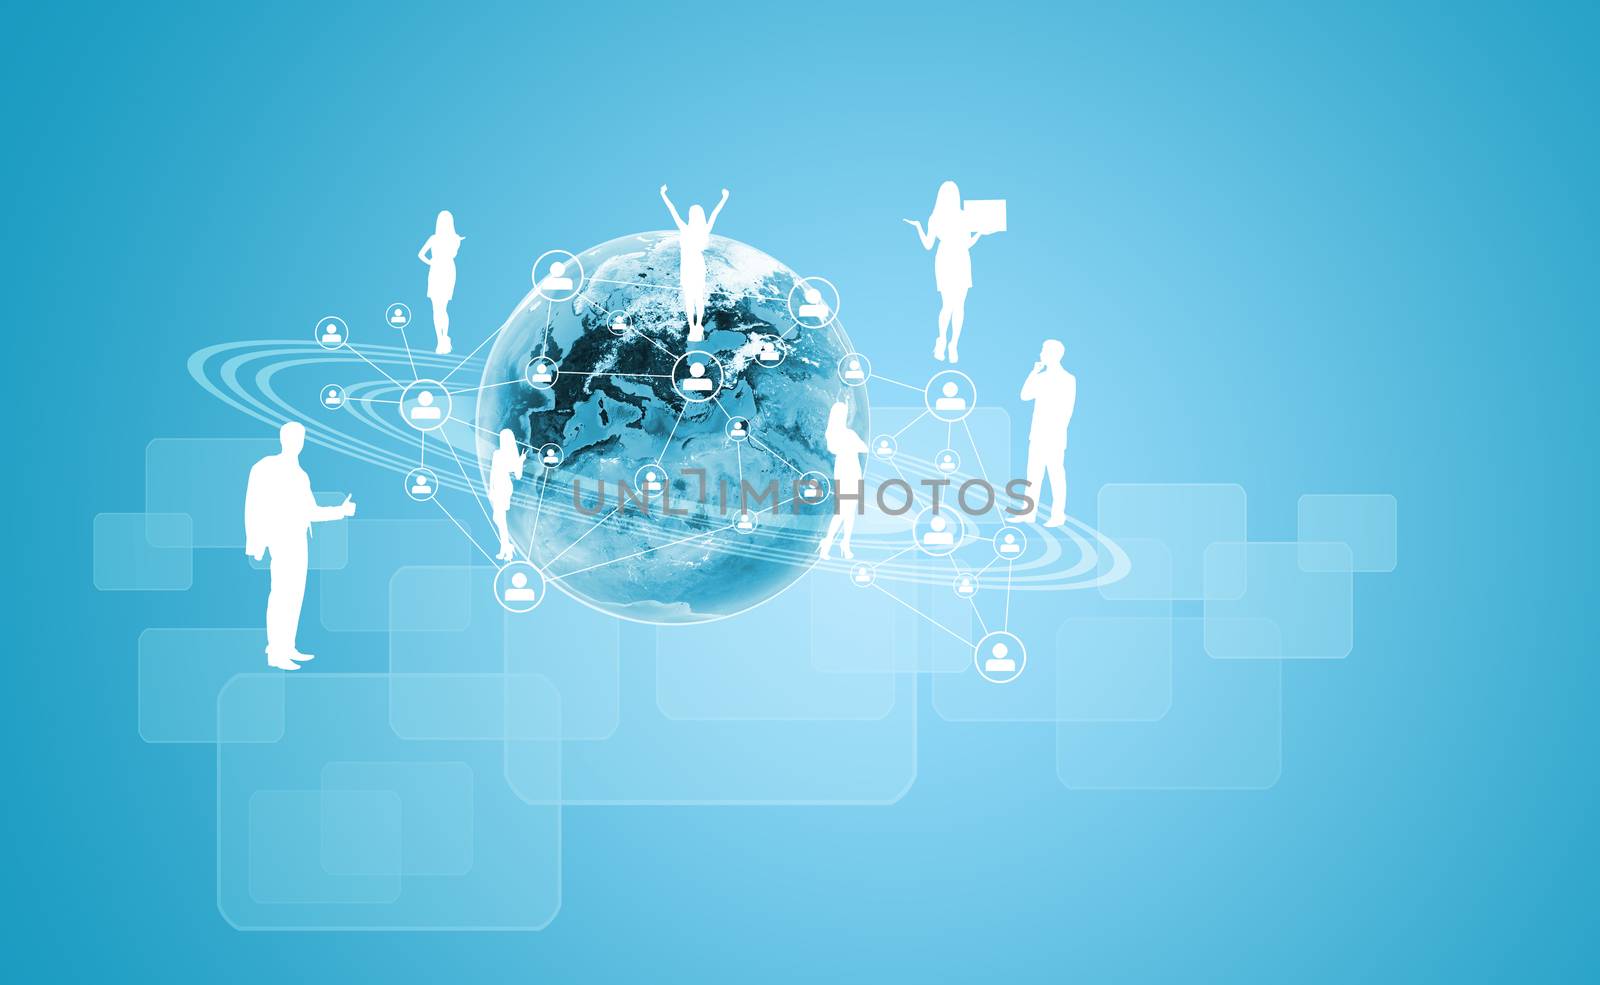 Earth with silhouettes of business people. Element of this image furnished by NASA